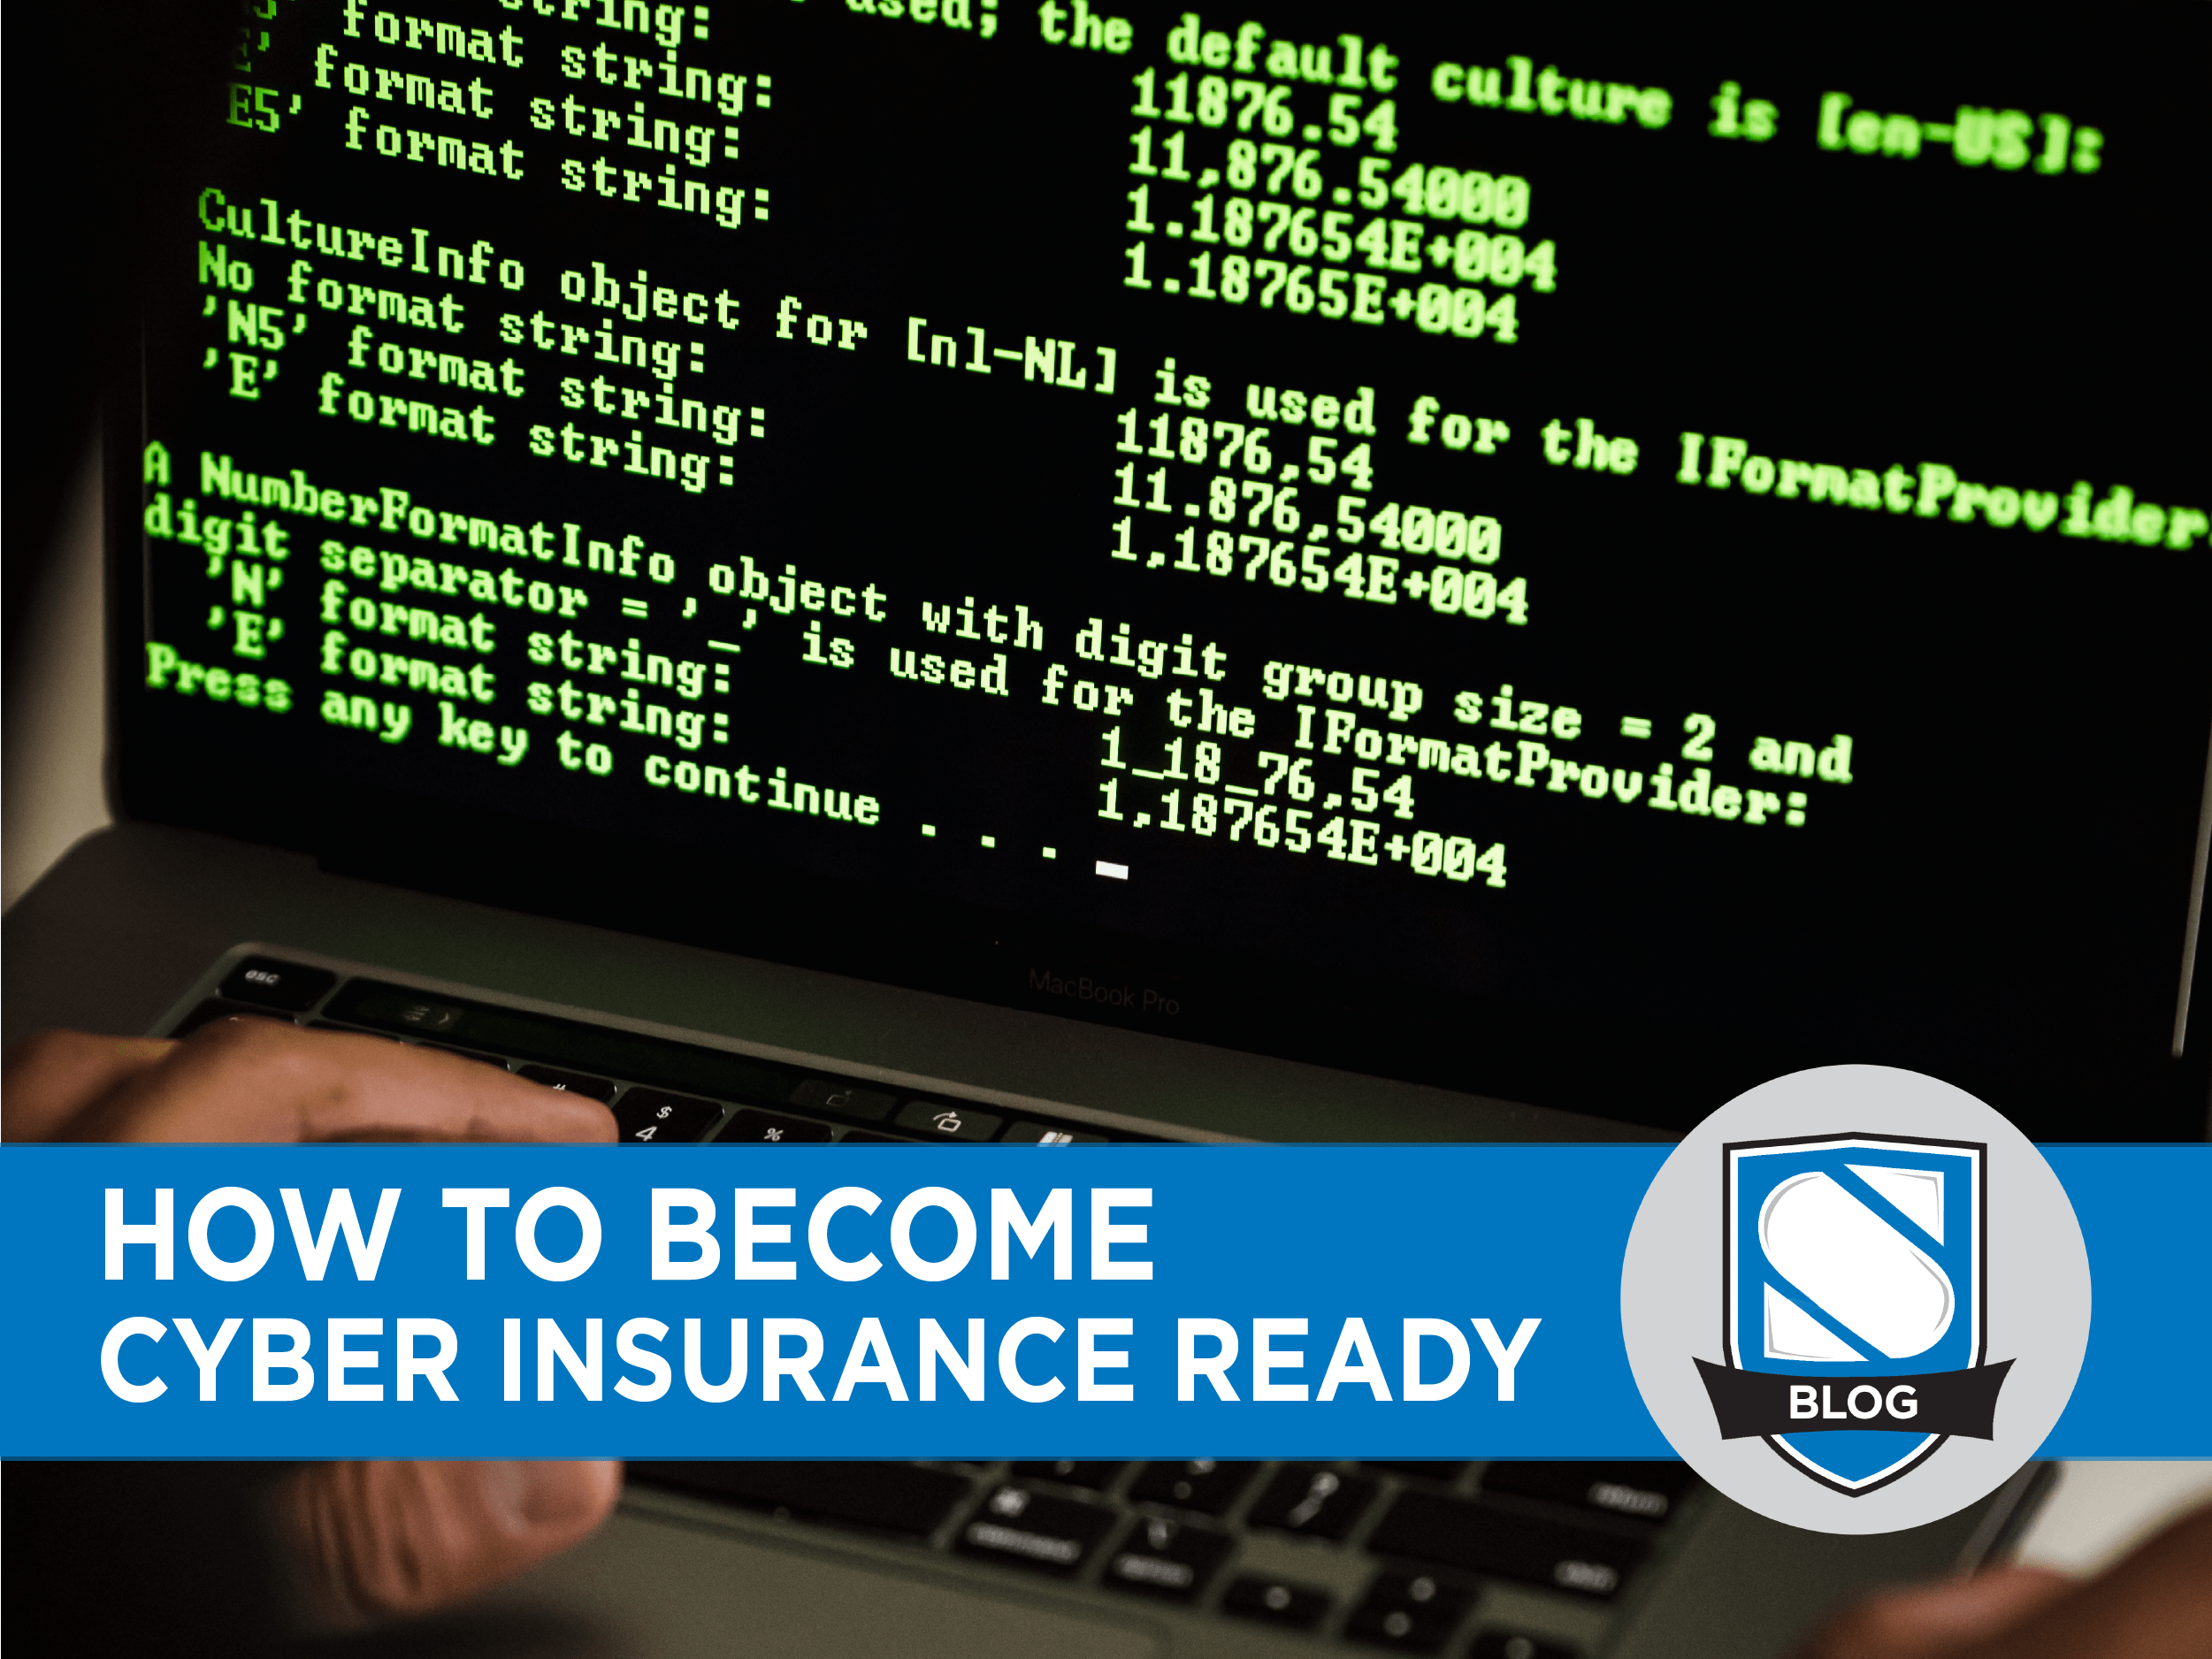 How to Make Your Business Cyber Insurance Ready